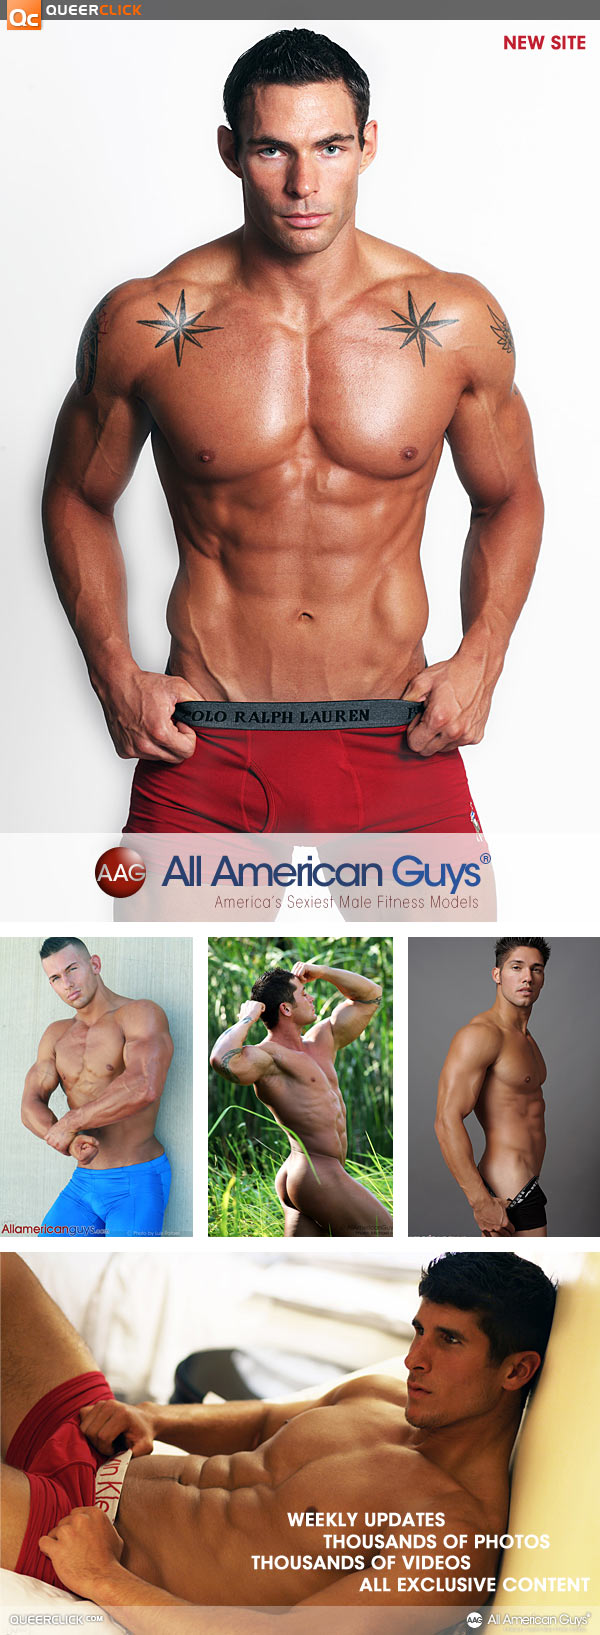 New Site Attack: All American Guys